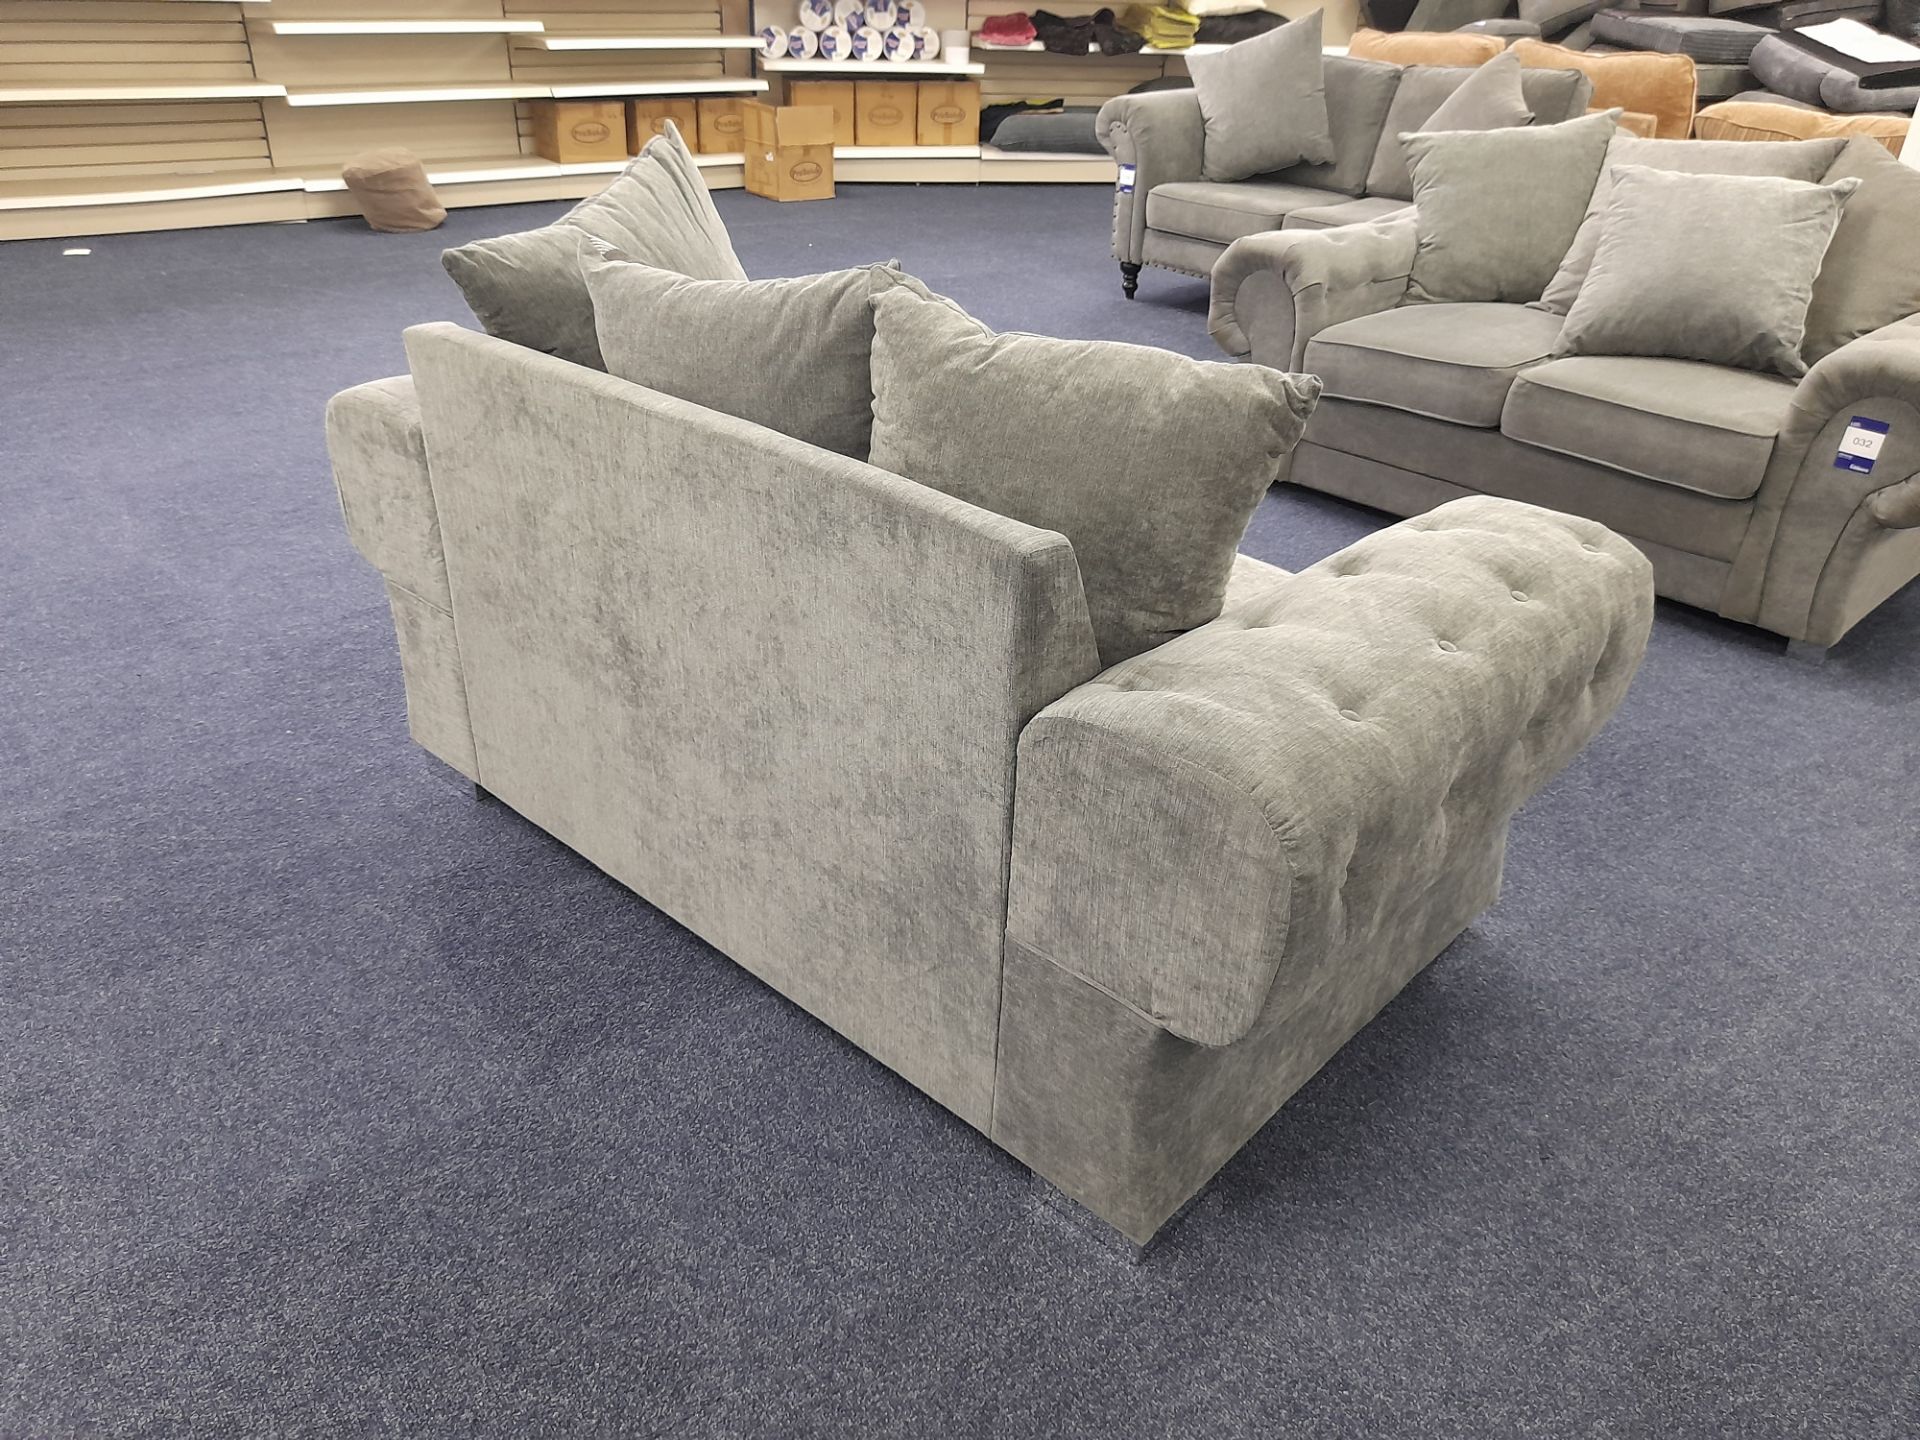 Grey fabric upholstered, 2 seater, scatter cushioned back sofa (Ex-Display) - Image 4 of 4